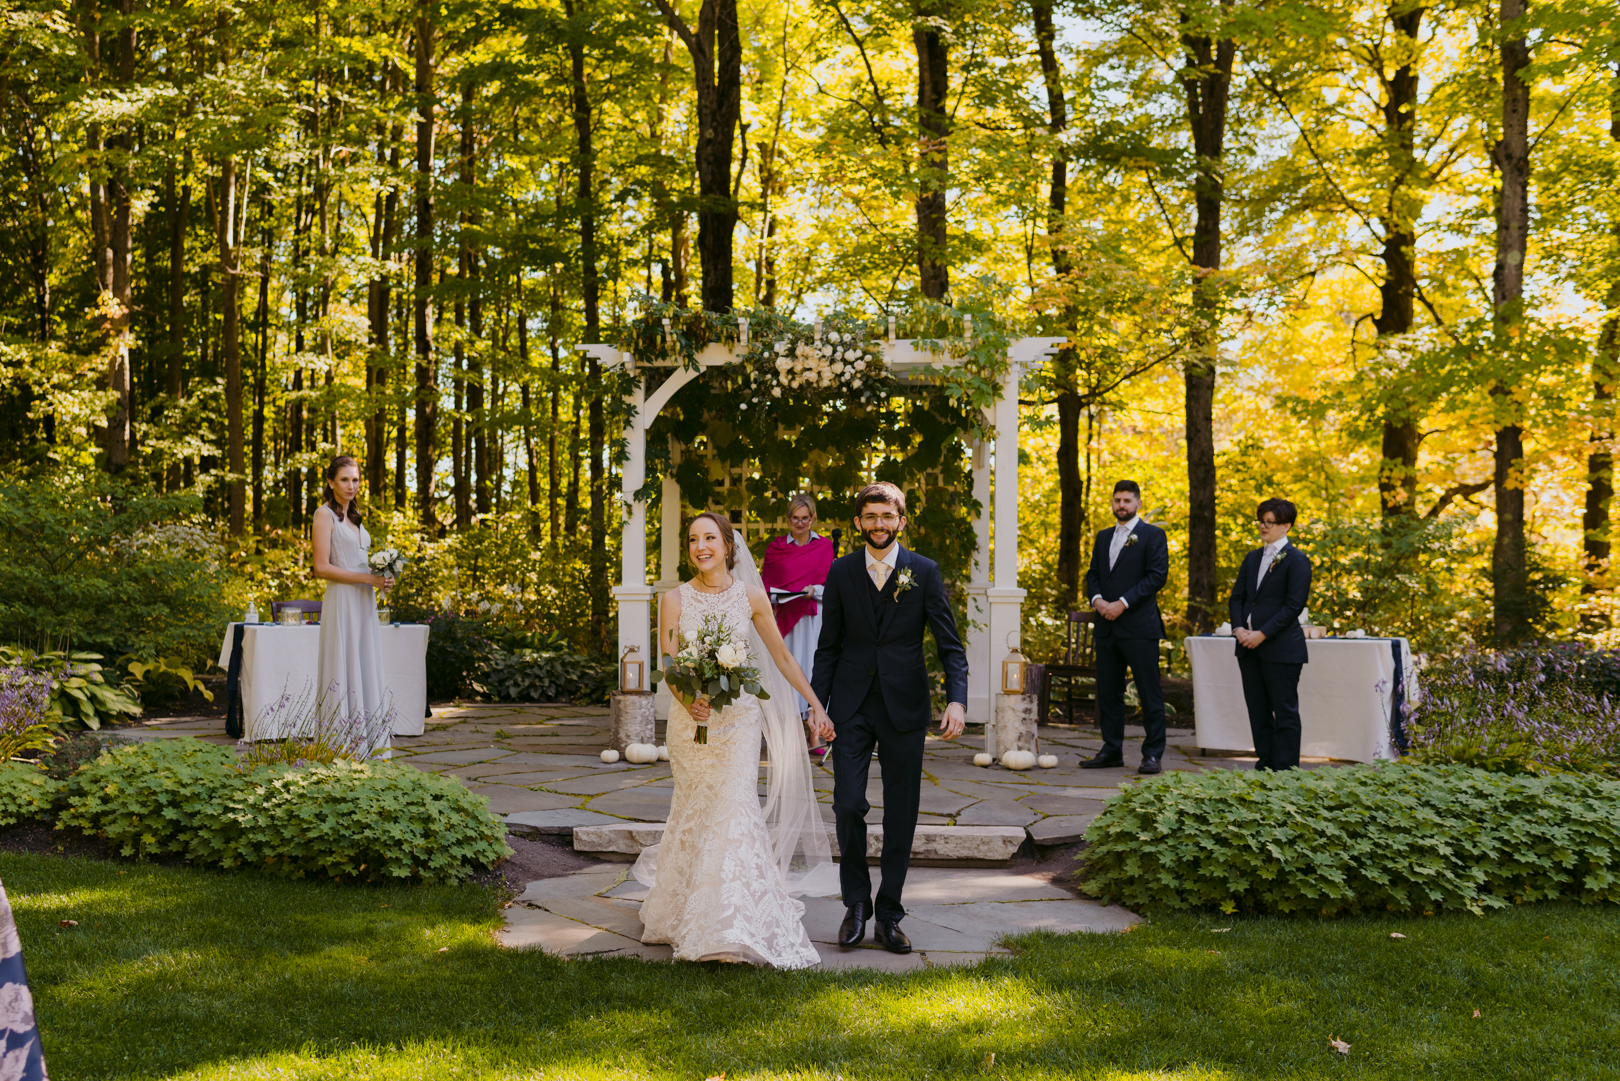 bride and groom recessional after wedding ceremony